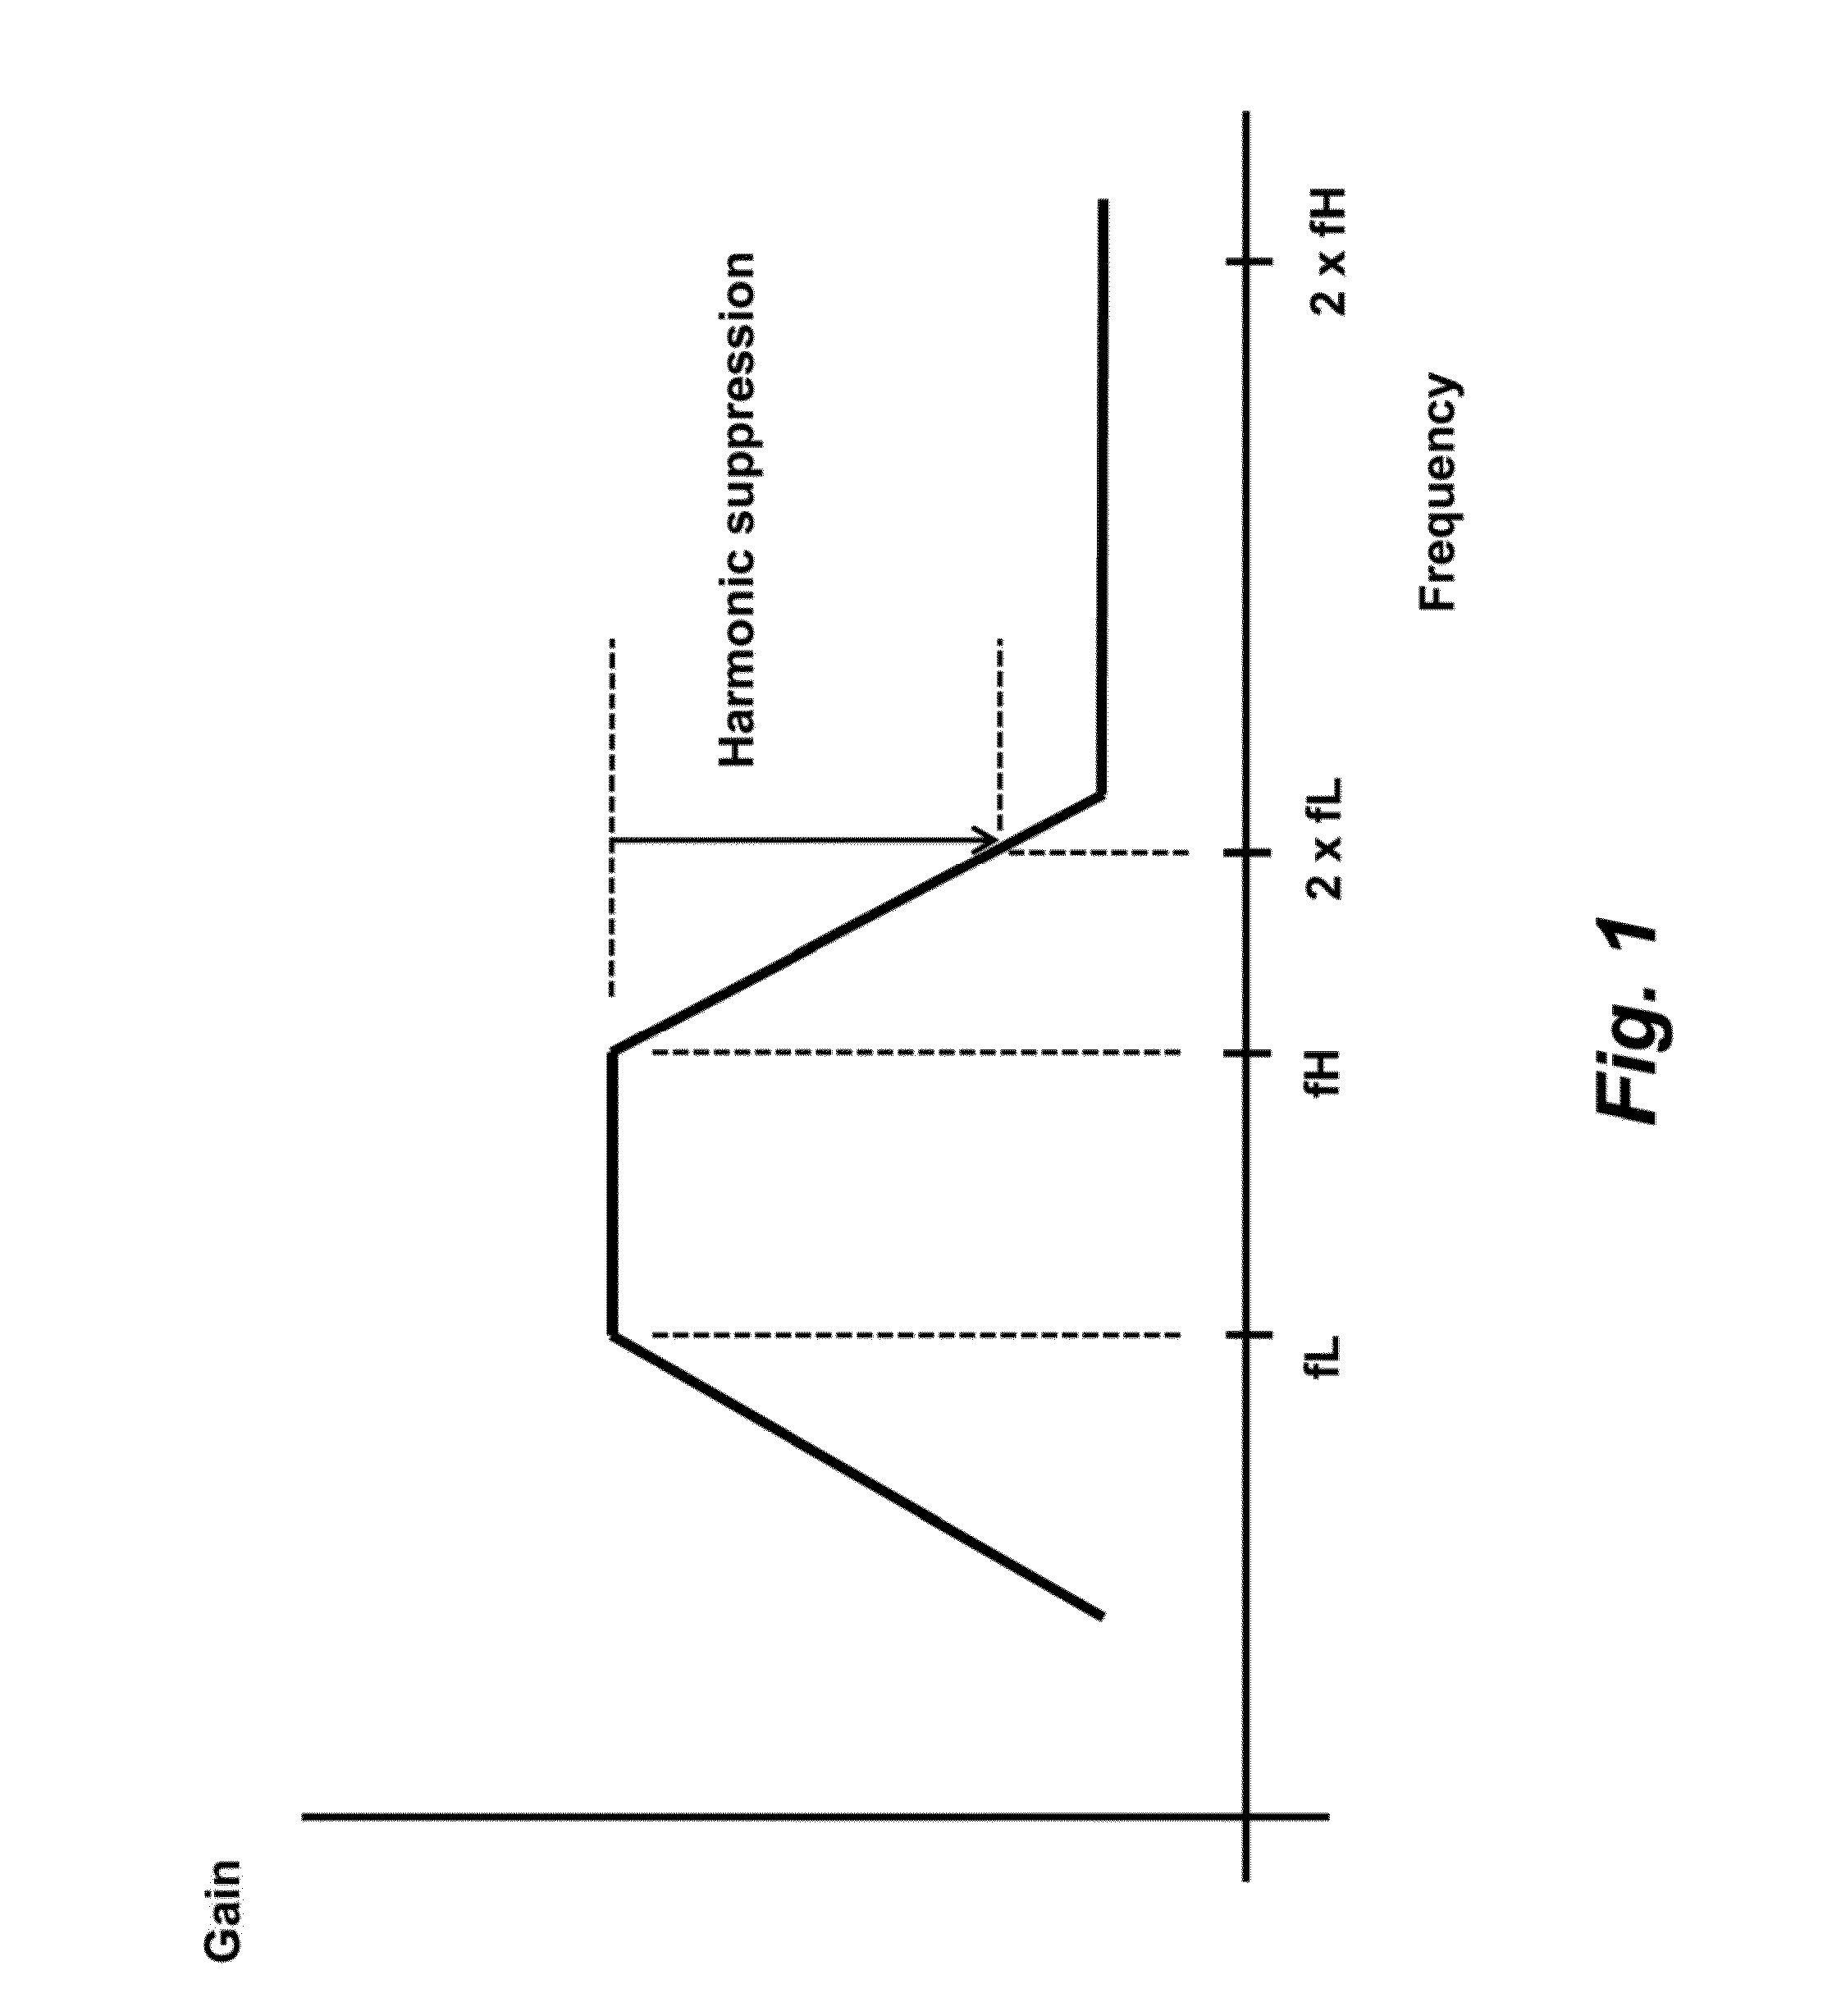 Output Matching Network for Wideband Power Amplifier with Harmonic Suppression